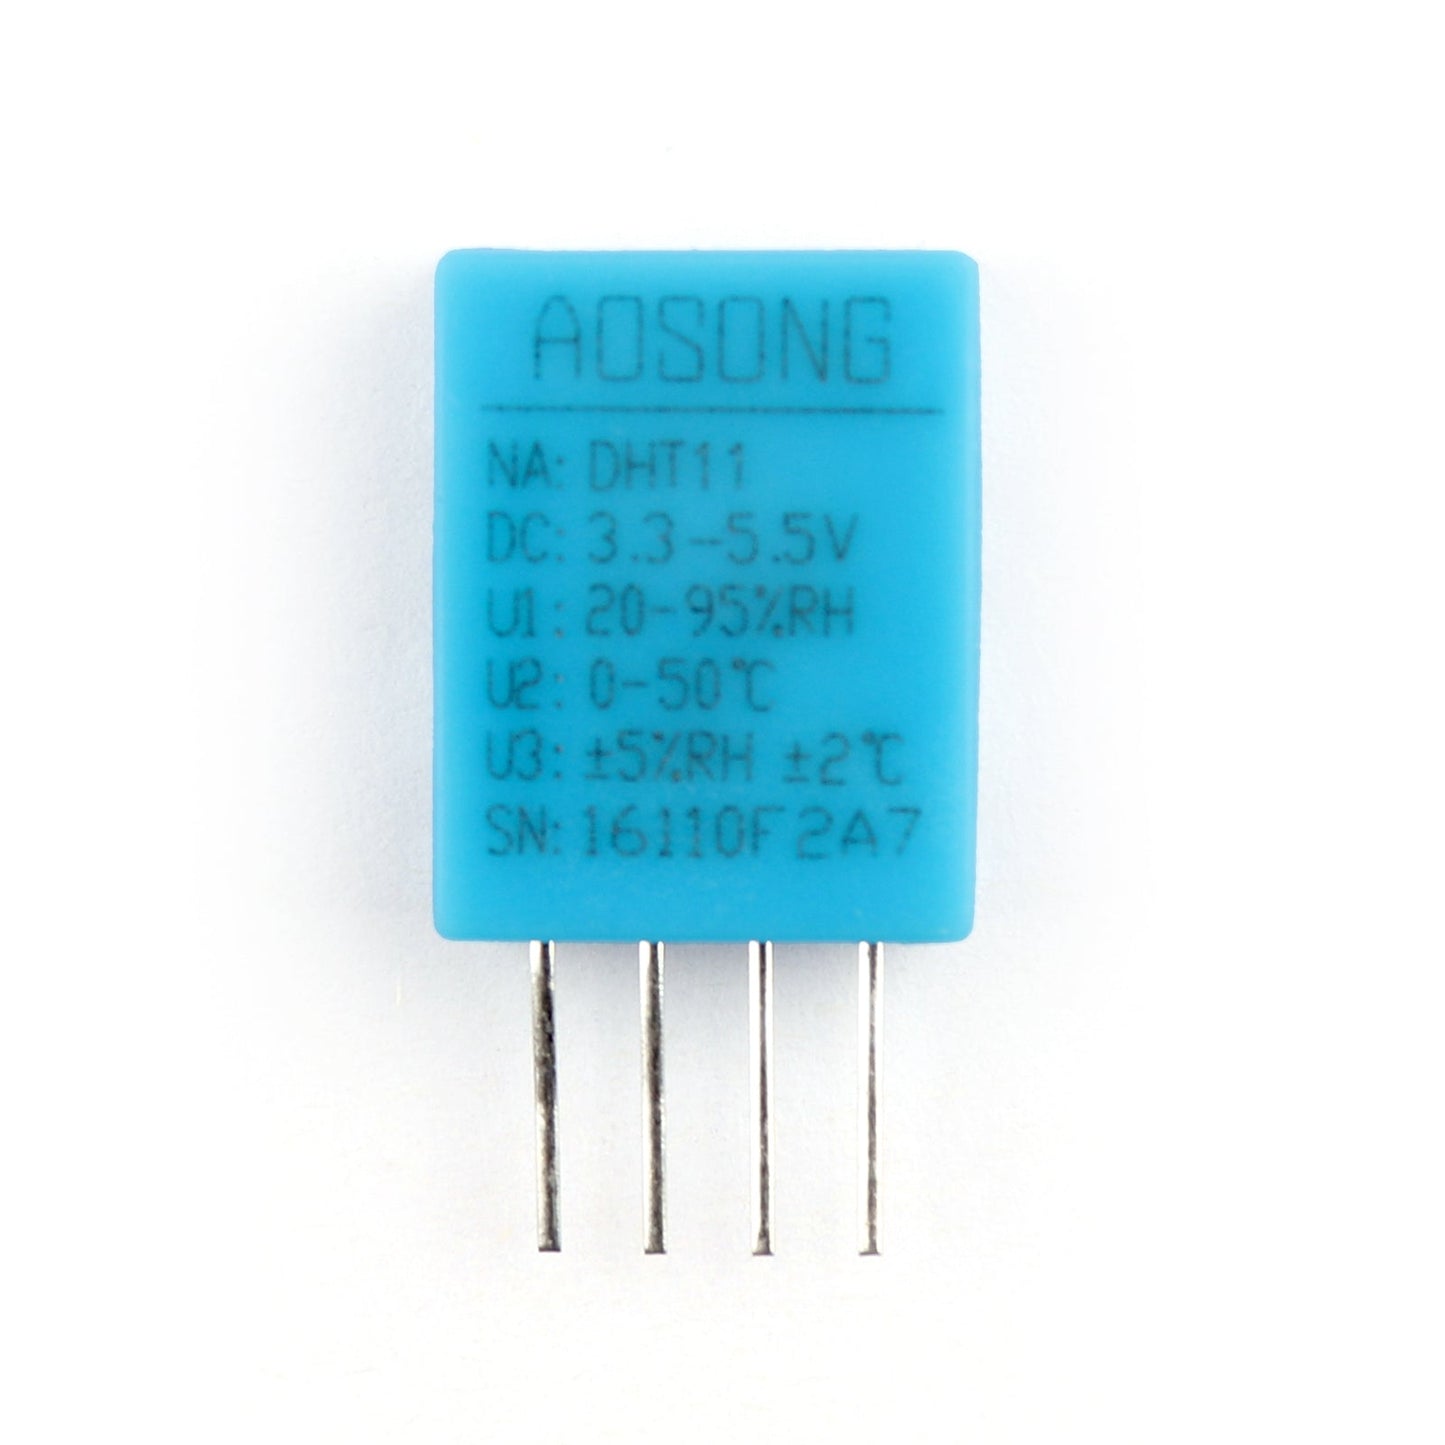 1Pcs DHT11 DHT-11 Digital Temperature and Humidity Sensor For Arduino